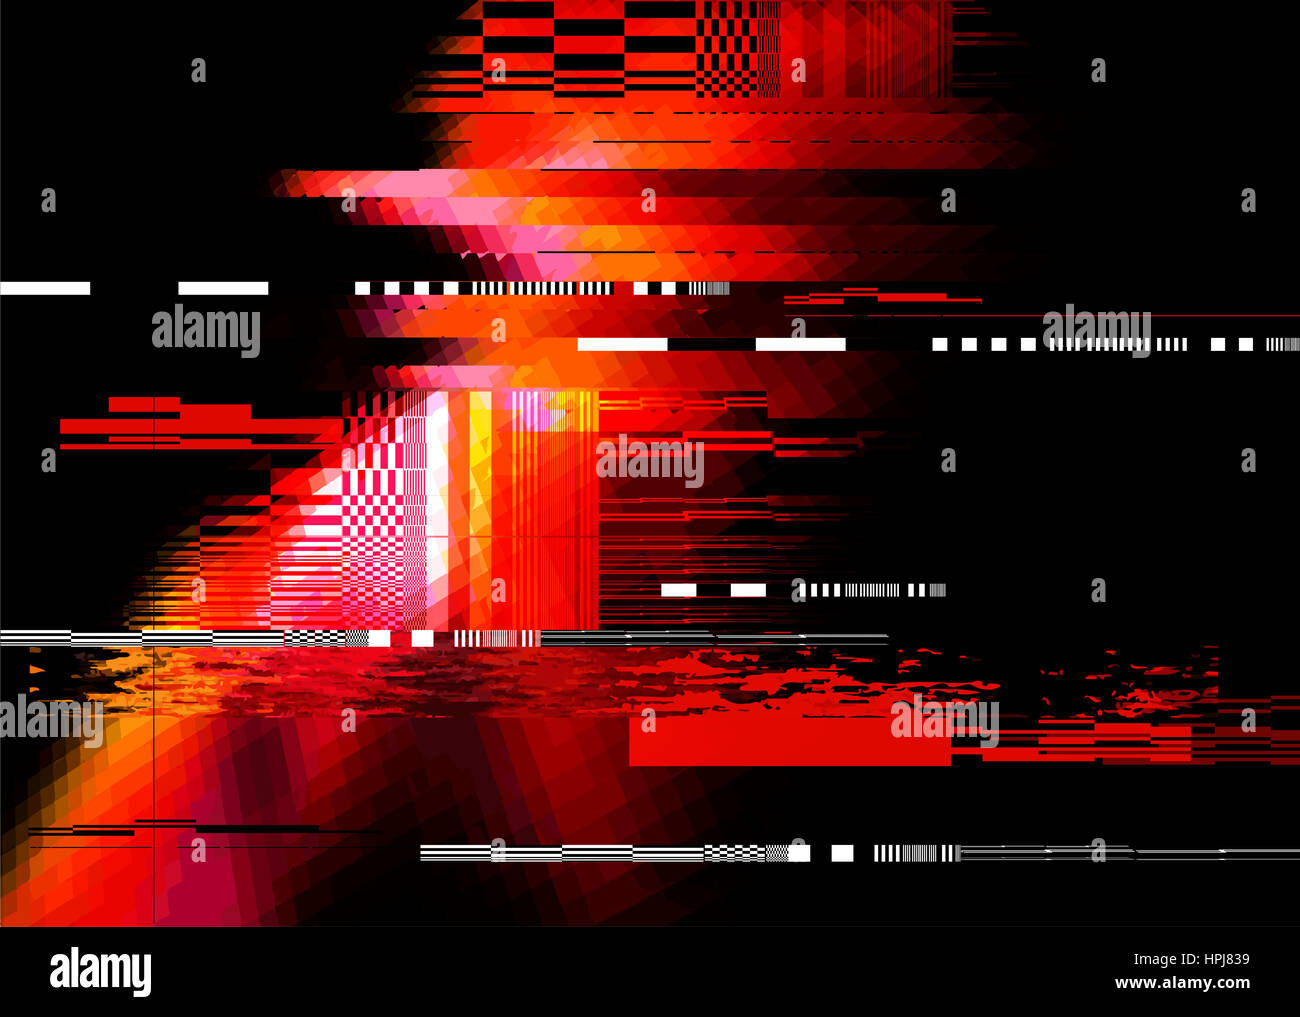 A redglitch noise distortion texture background. Vector illustration Stock Photo